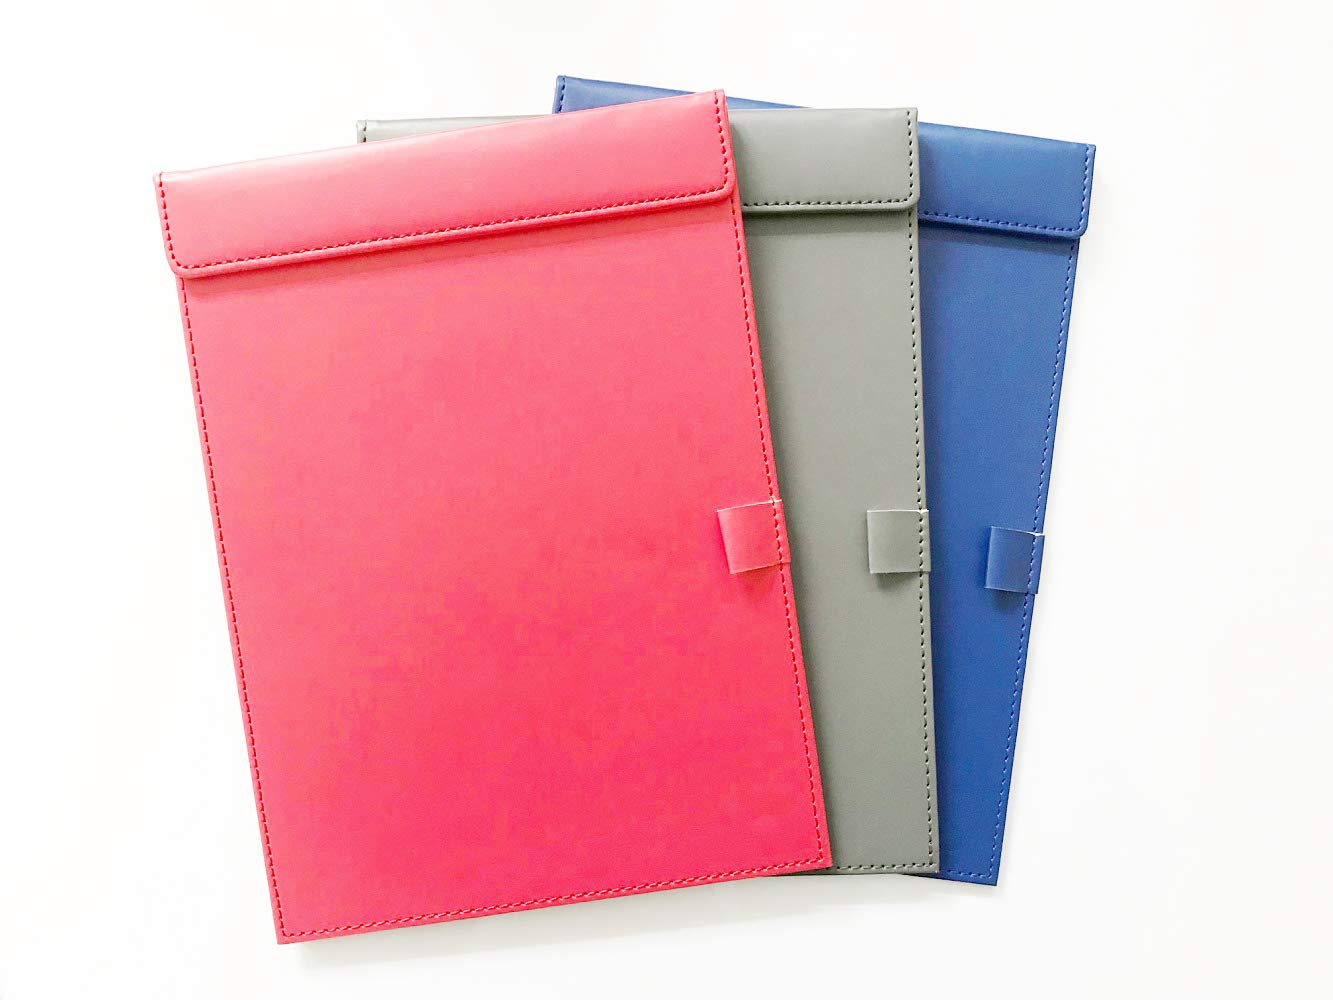 NJ Ultra Smooth PU Leather Conference Pad Clipboard, Business Meeting Magnetic Writing Pad with Pen Holder: Red,Gray,Blue